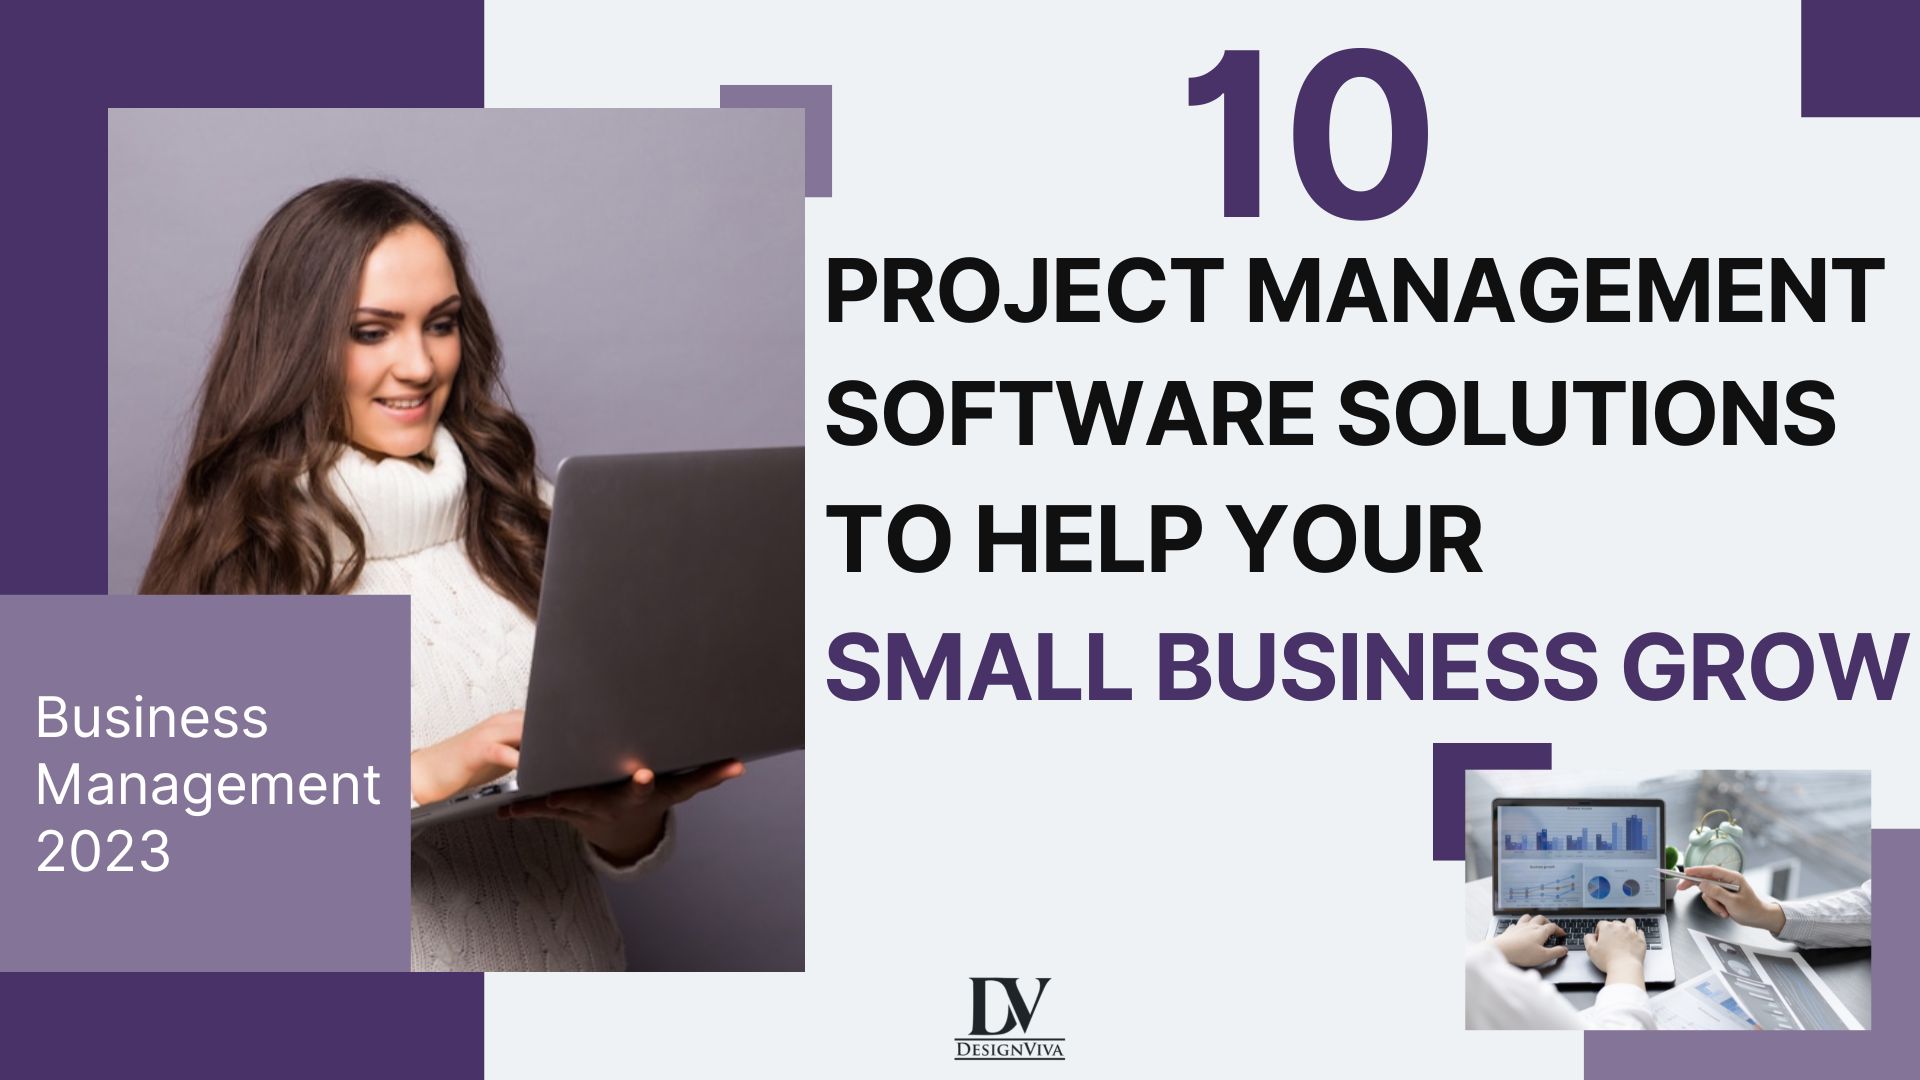 10 Project Management Software Solutions to Help Your Small Business Grow